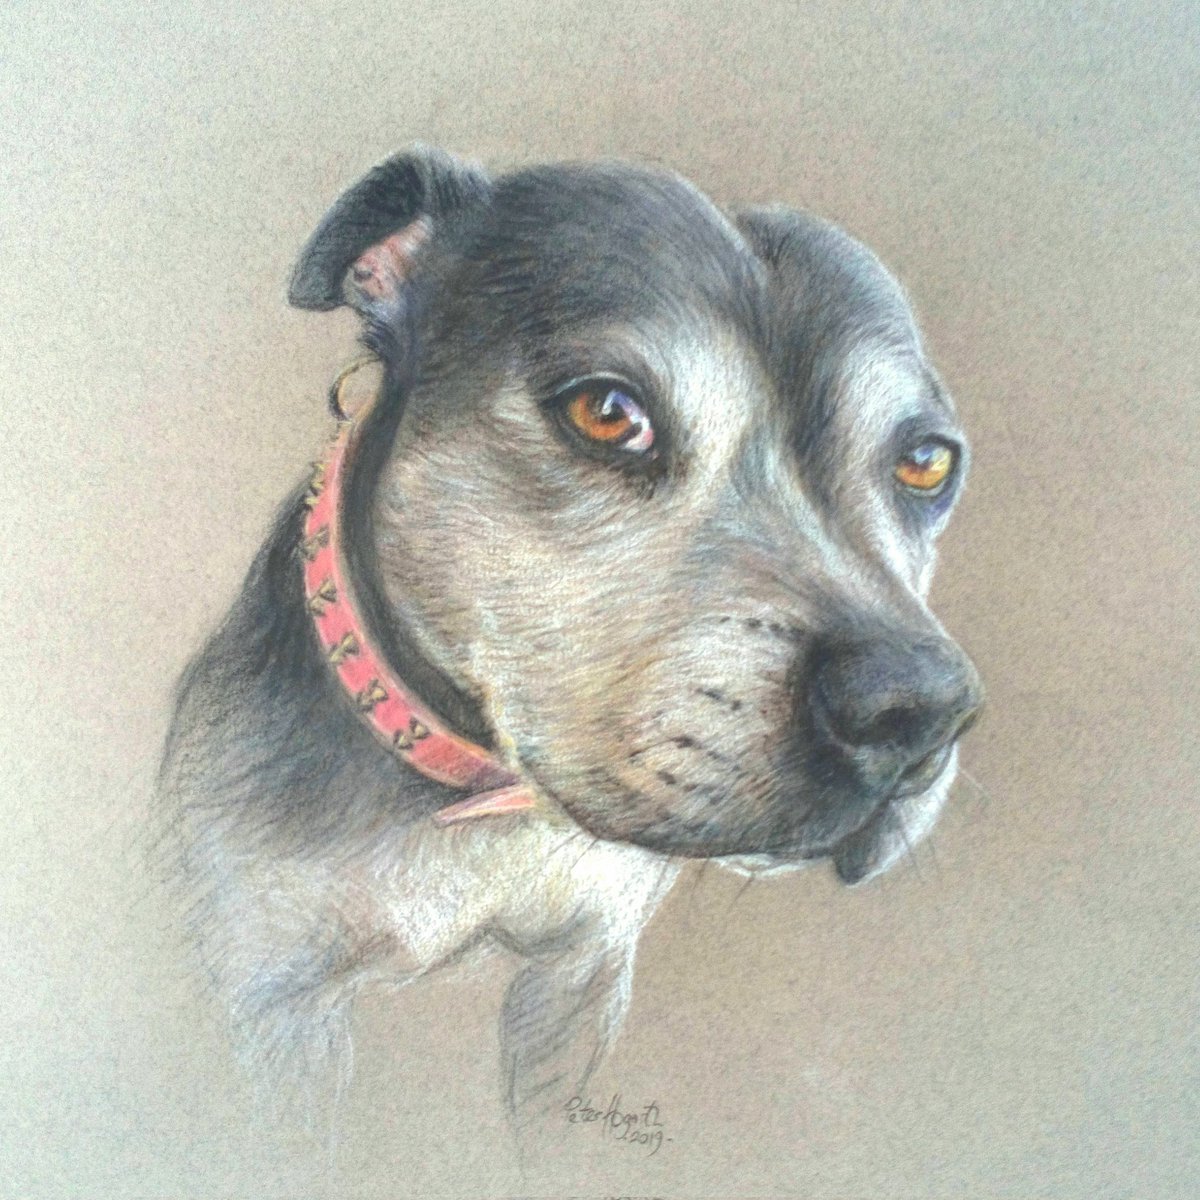 A portrait of a beautiful Staffordshire Bull Terrier to bring you a smile today.  I was commissioned to paint this gentle soul in 2019. -soft pastels on Canson Mi Teintes paper 😊.